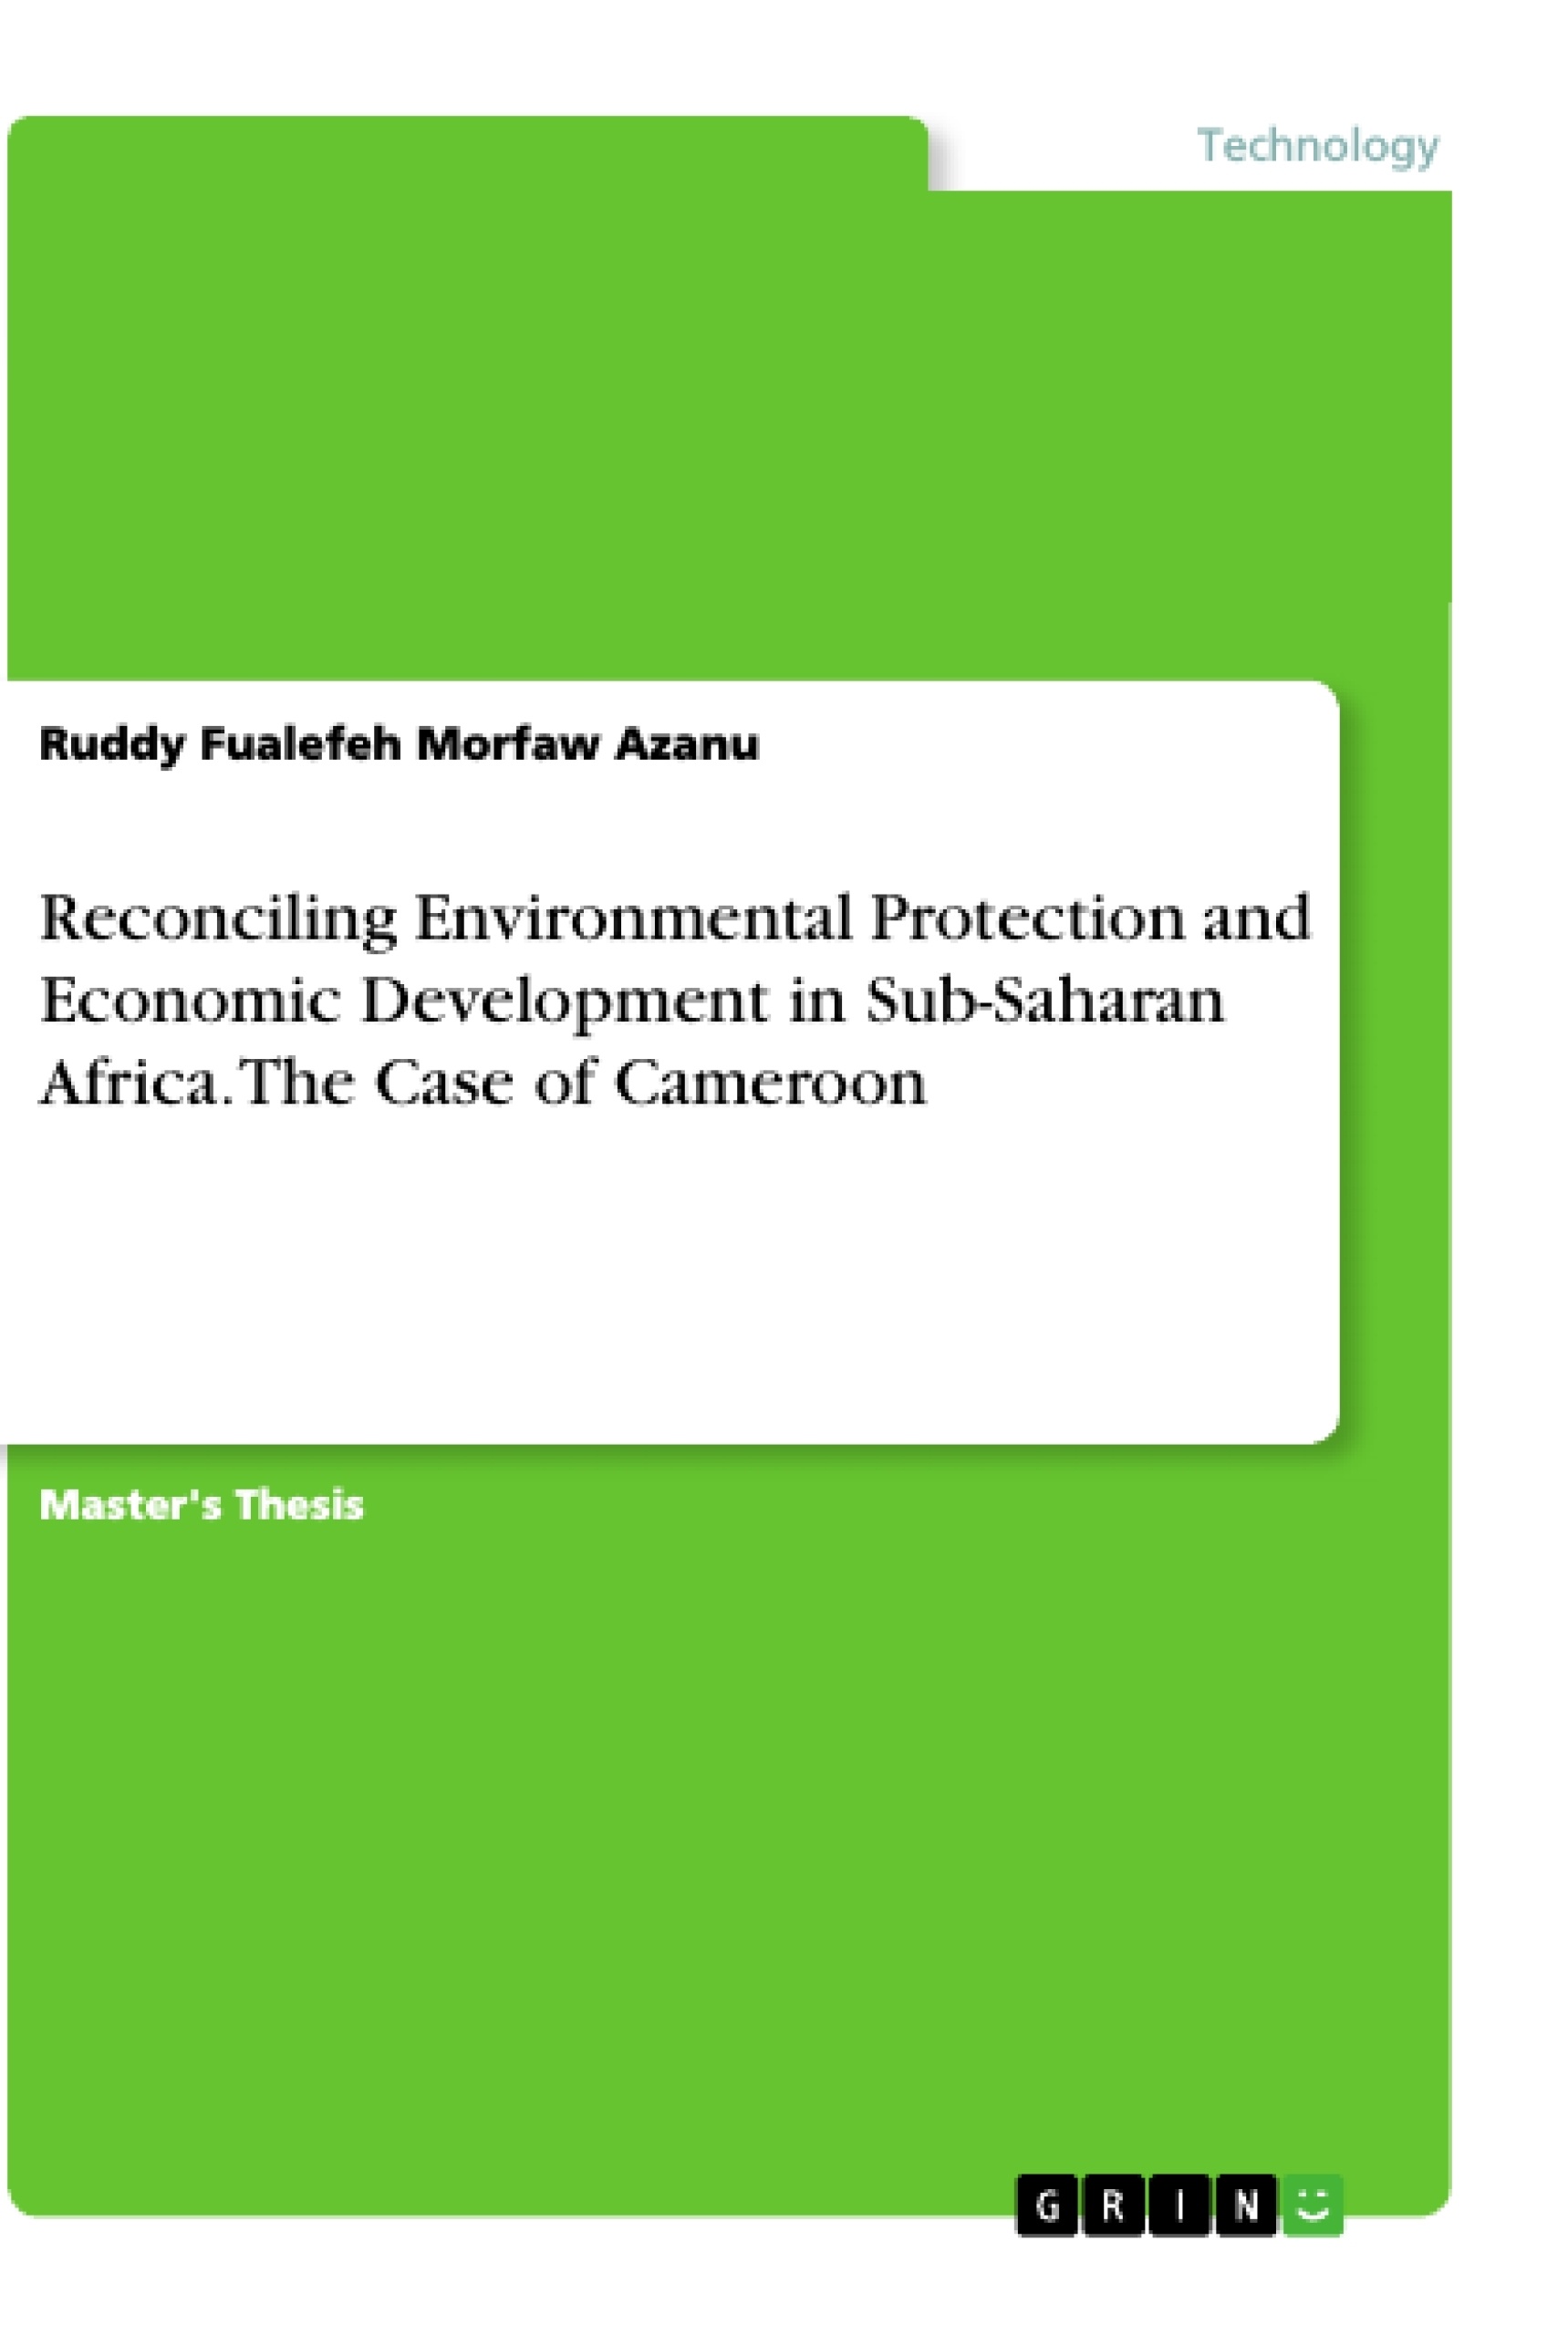 Titre: Reconciling Environmental Protection and Economic Development in Sub-Saharan Africa. The Case of Cameroon